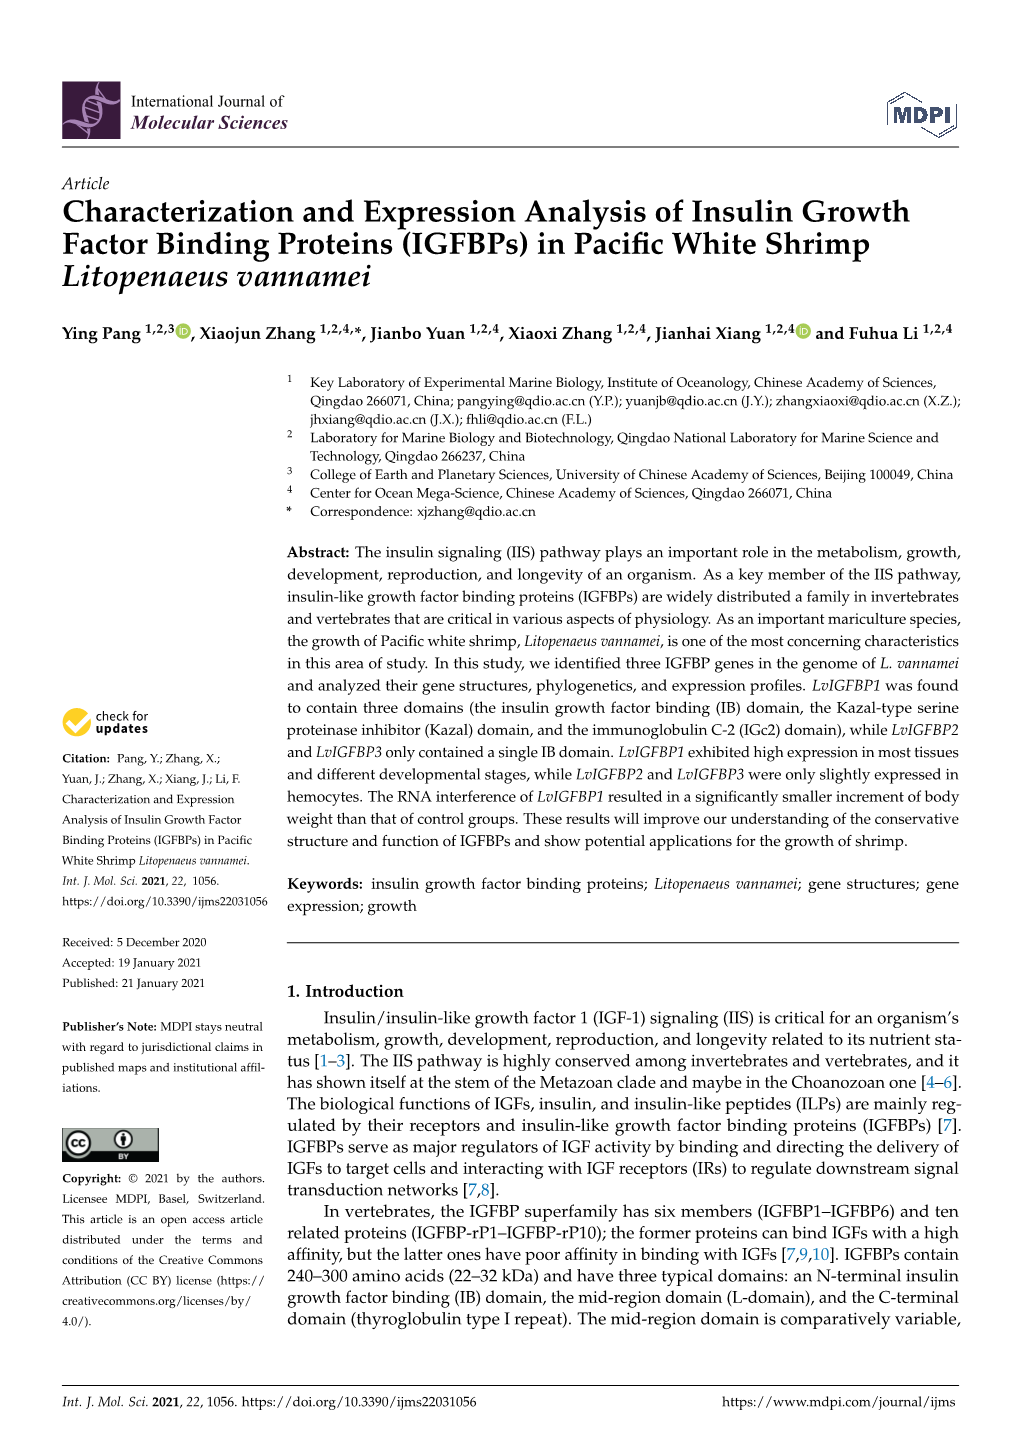 Characterization and Expression Analysis of Insulin Growth Factor Binding Proteins (Igfbps) in Paciﬁc White Shrimp Litopenaeus Vannamei